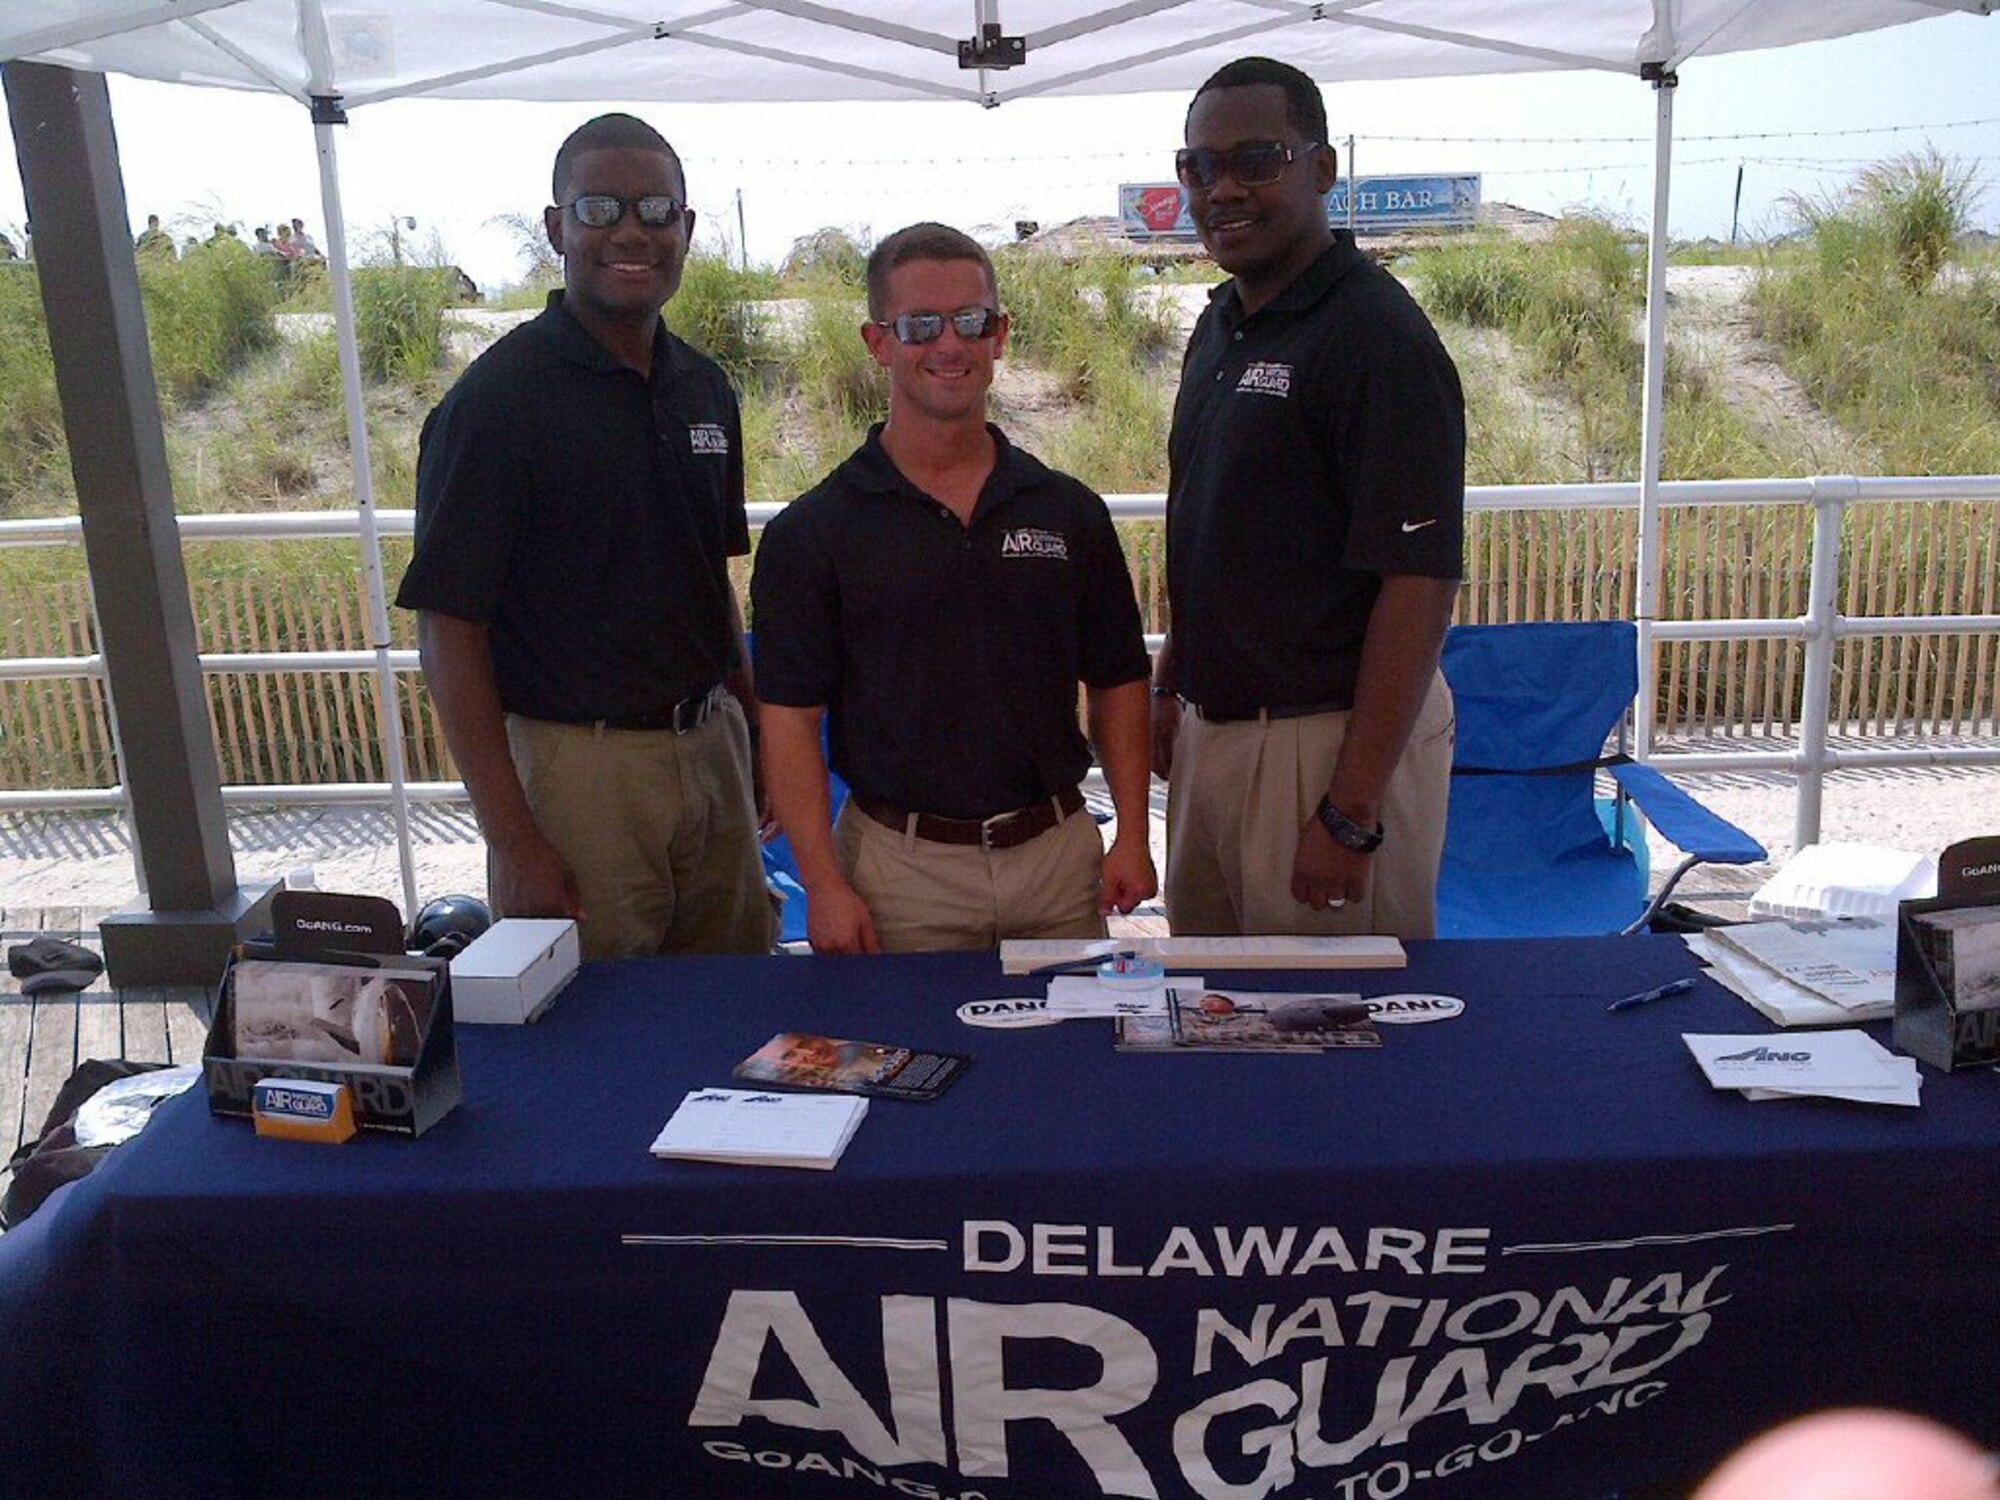 Delaware Air National Guard recruiters Senior Airman Desmond Overton, Tech. Sgt. Sam Lewis and Tech. Sgt. Terrence Parker at the 2012 Atlantic City Thunder over the Boardwalk Airshow on August 17, 2012. The event drew 800,000 visitors in 2011. (U.S. Air Force photo/Staff Sgt. Brian Janssens)